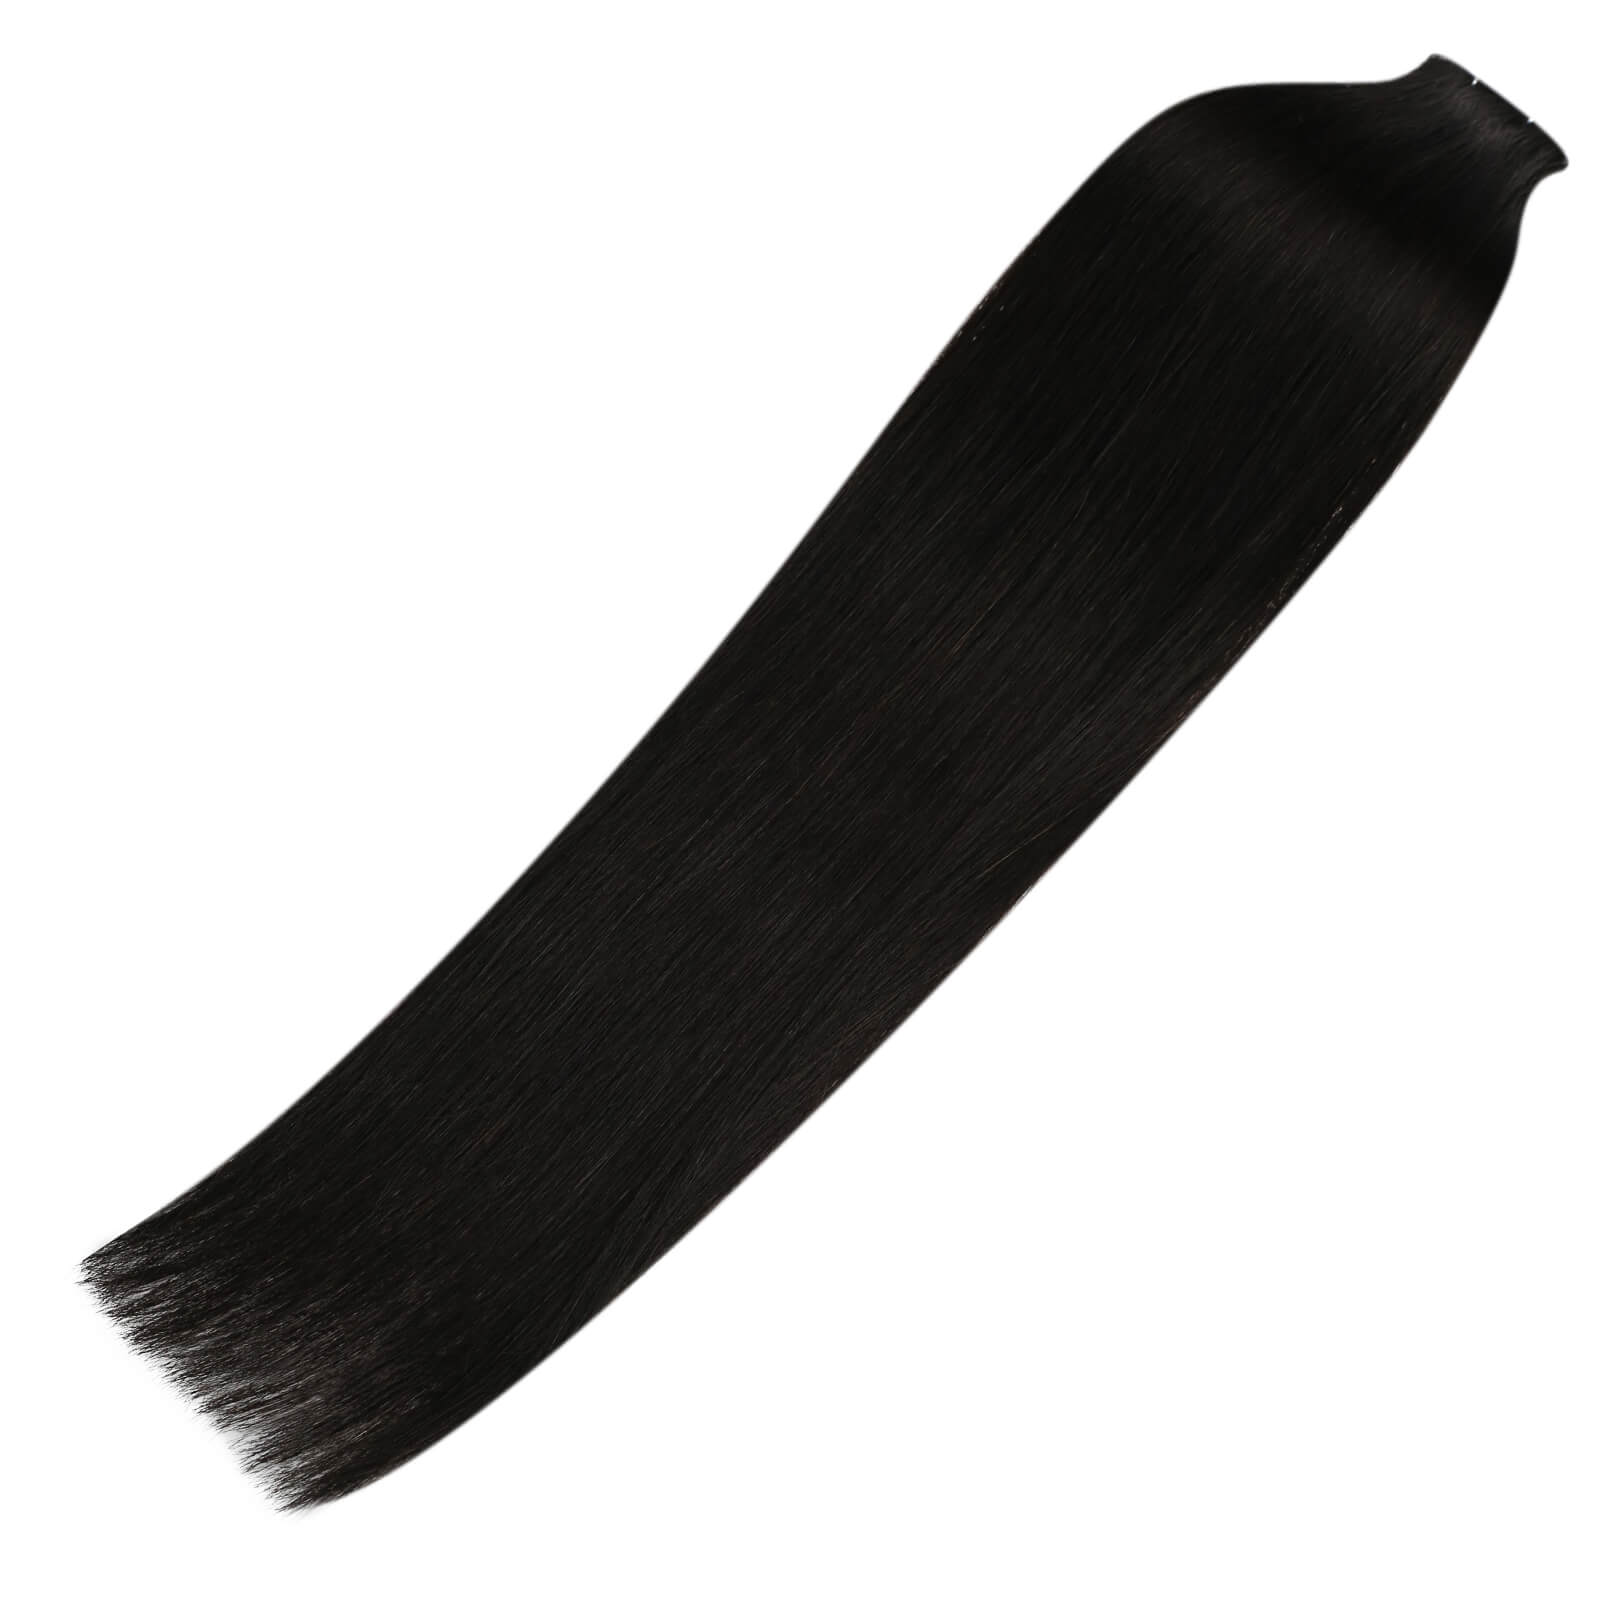 sew in human hair extensions professional weft hair extensions